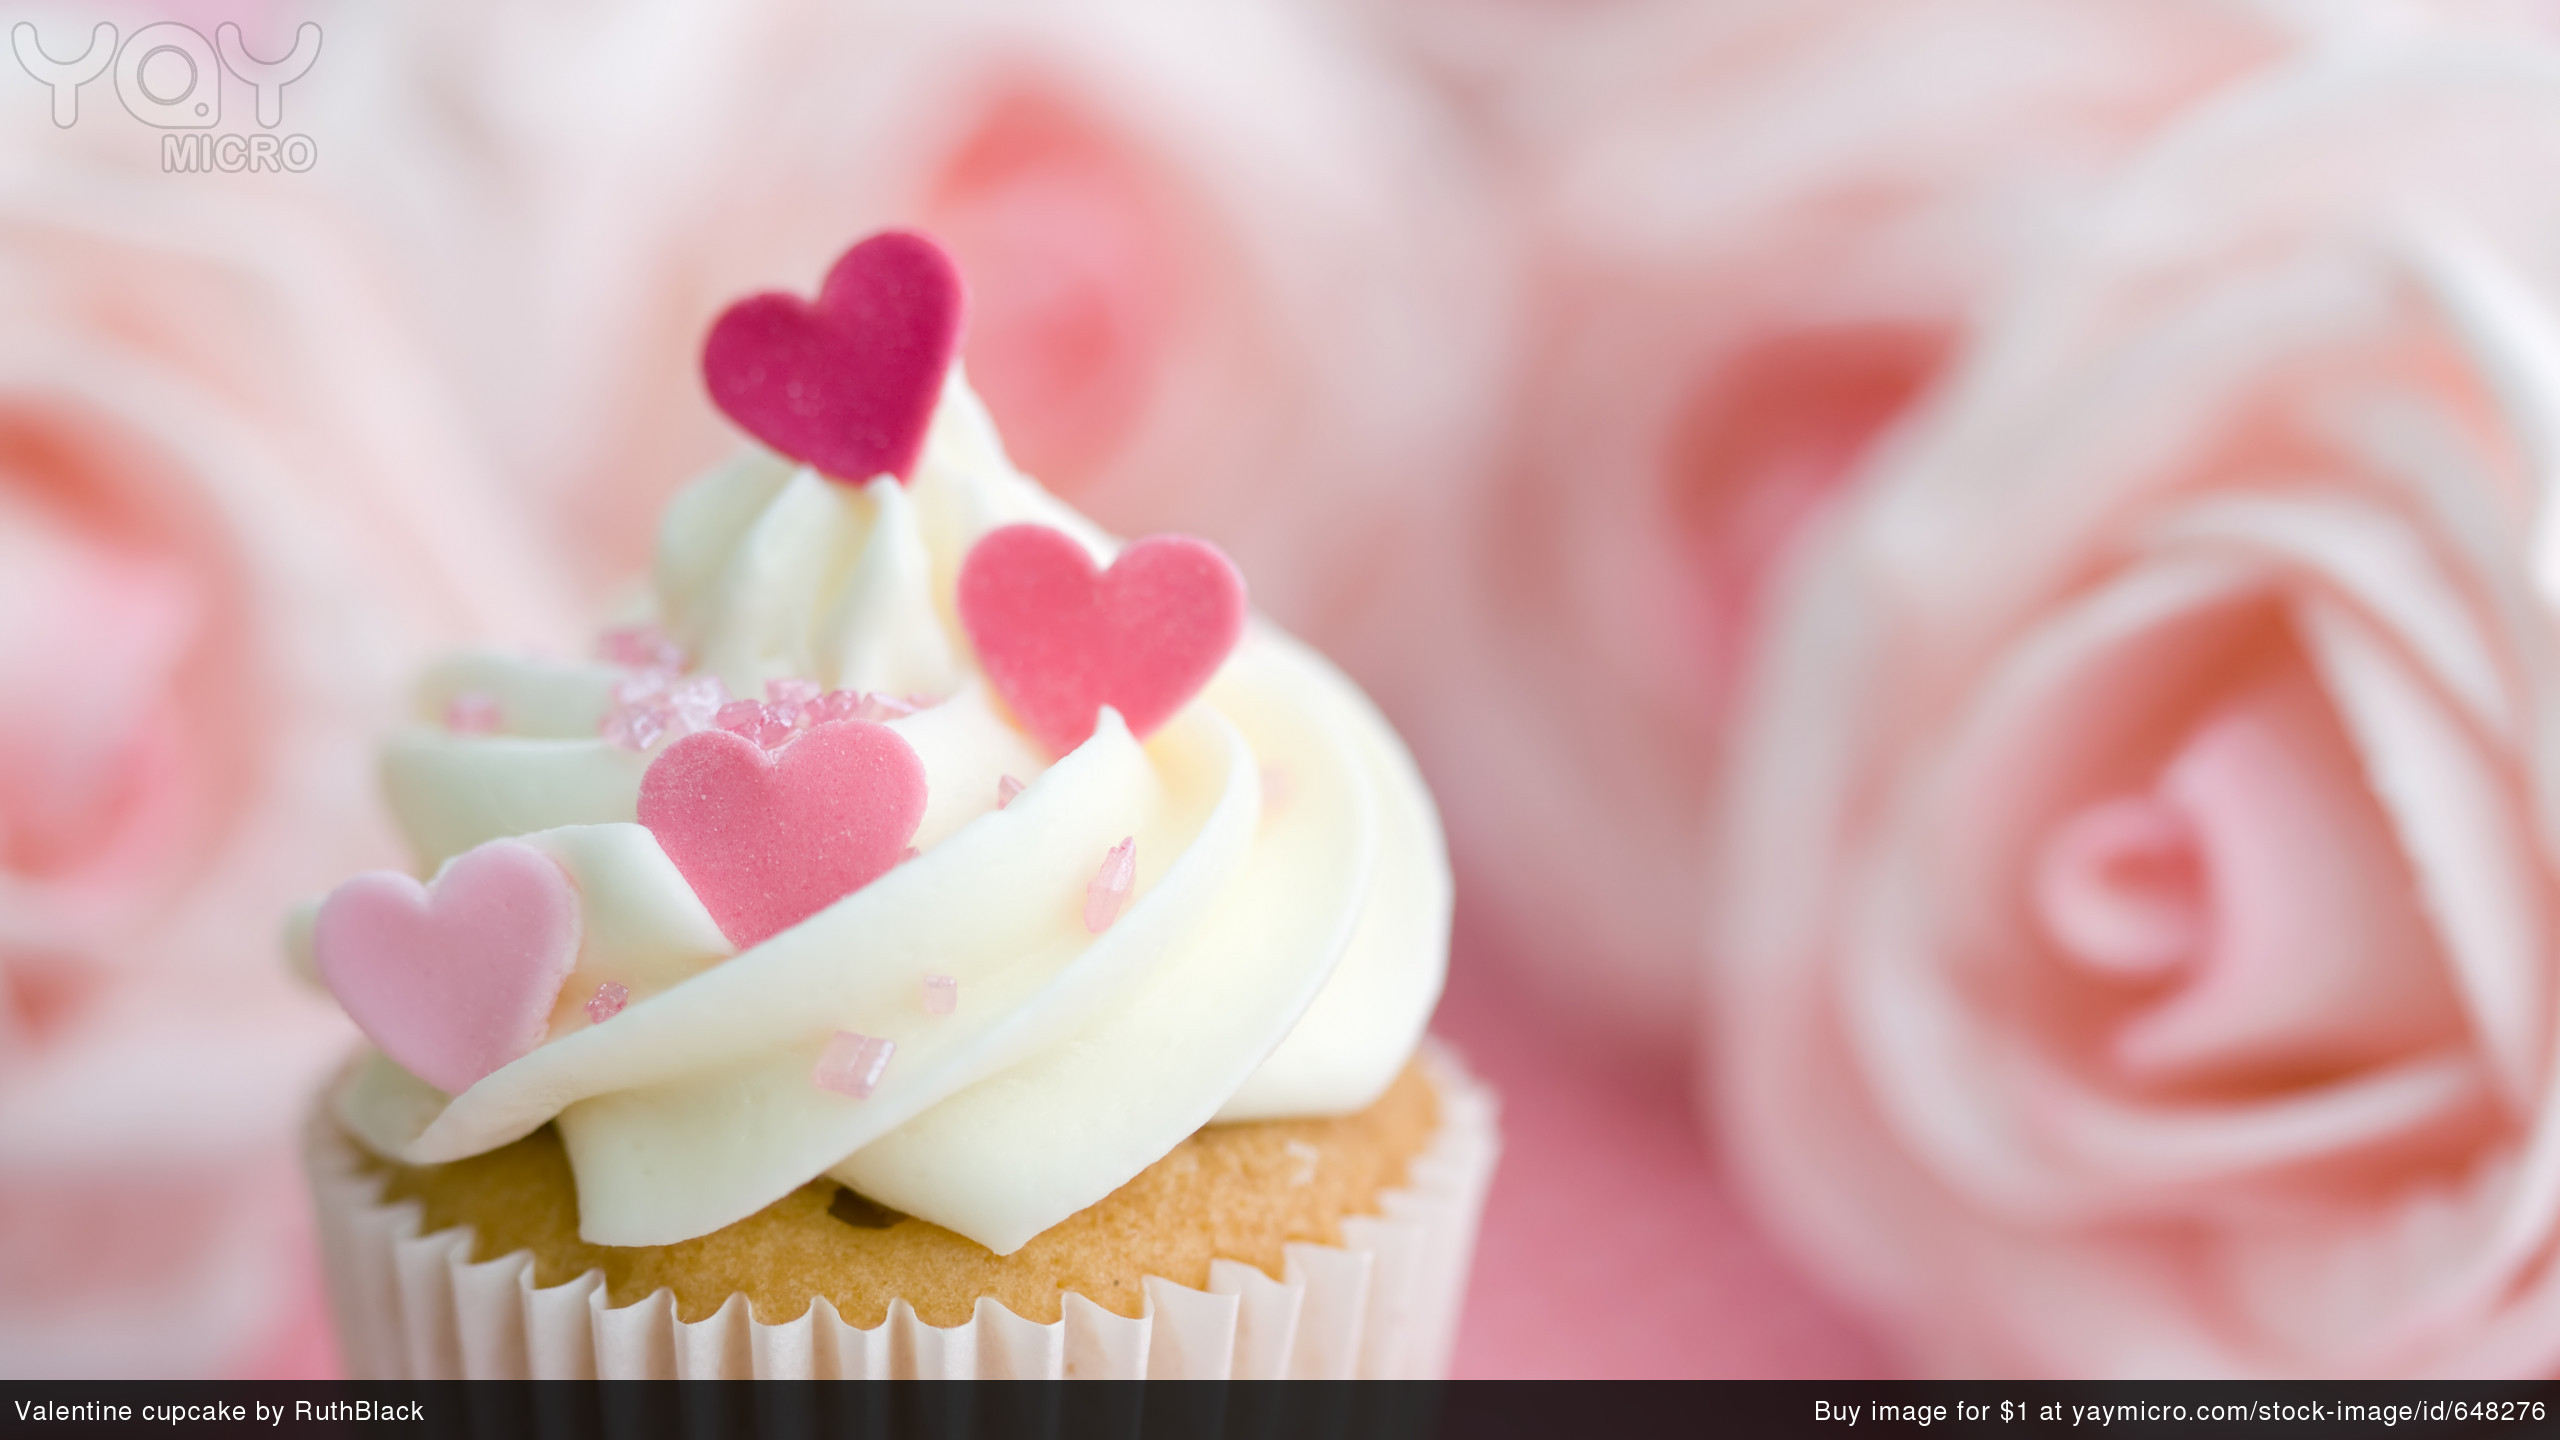 Pin Wallpaper Cupcake Background Image And Save As